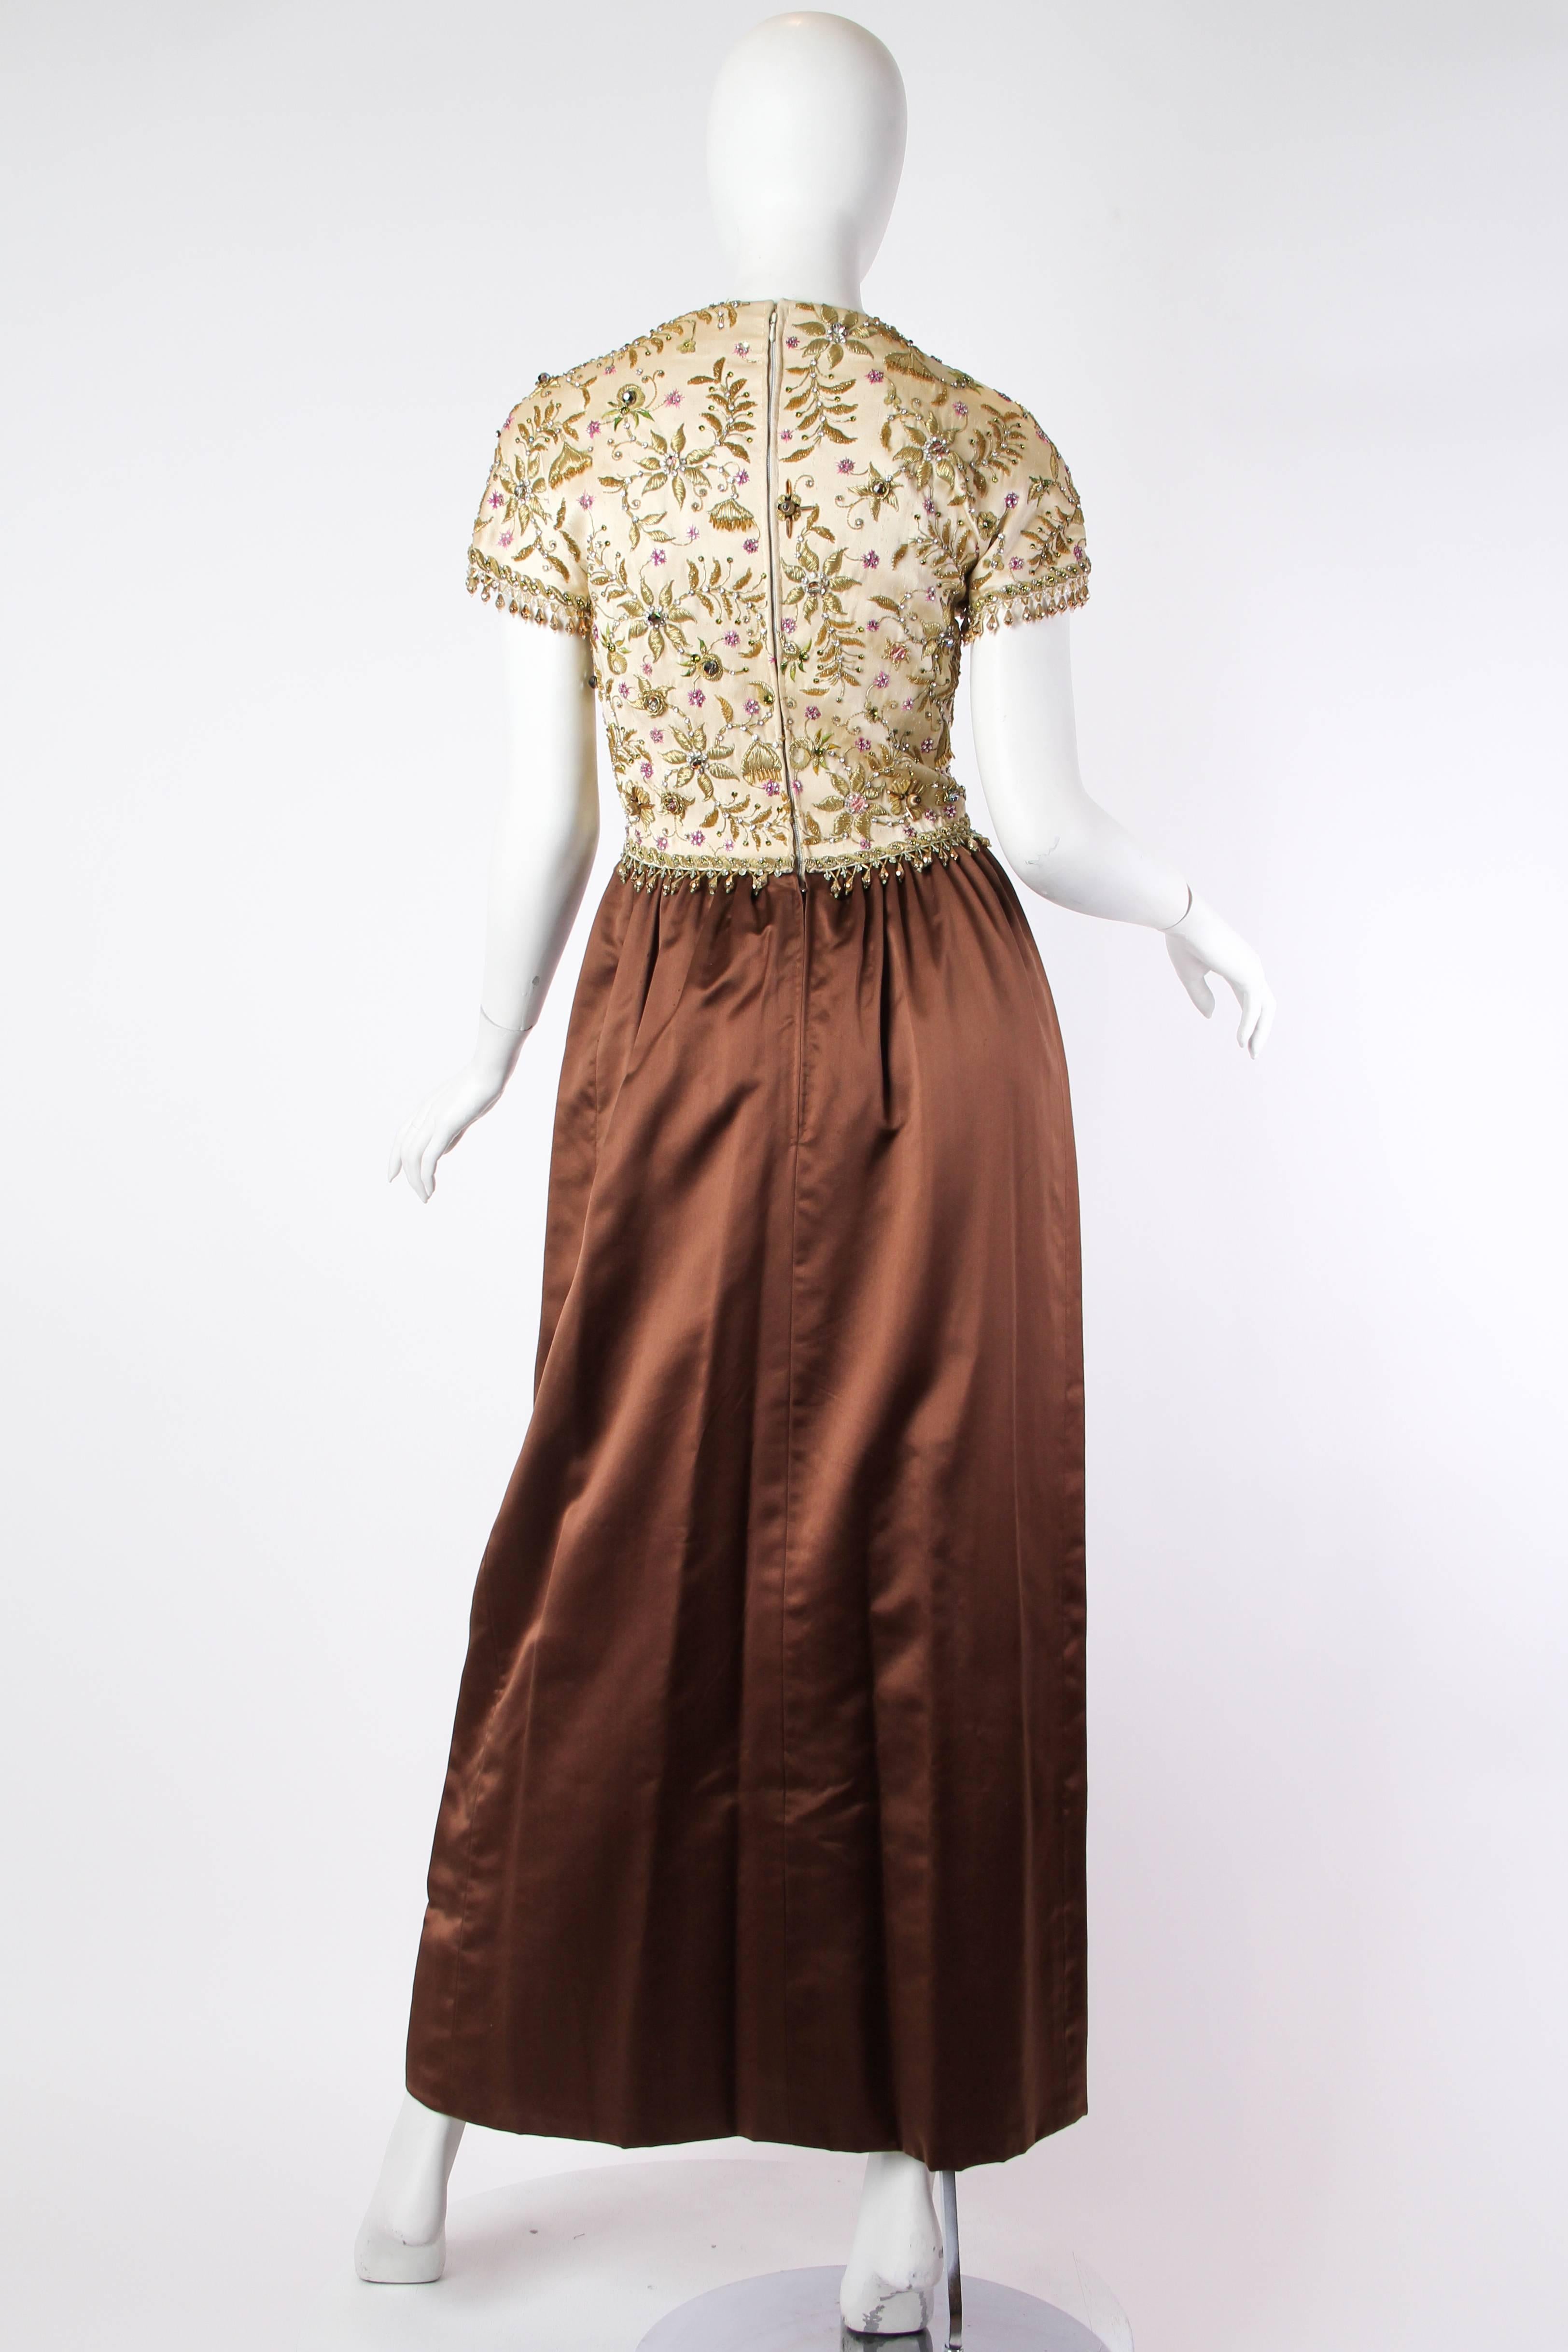 1950S BALENCIAGA Style Ivory & Brown Silk Duchess Satin Gown With Elaborate Gol For Sale 1